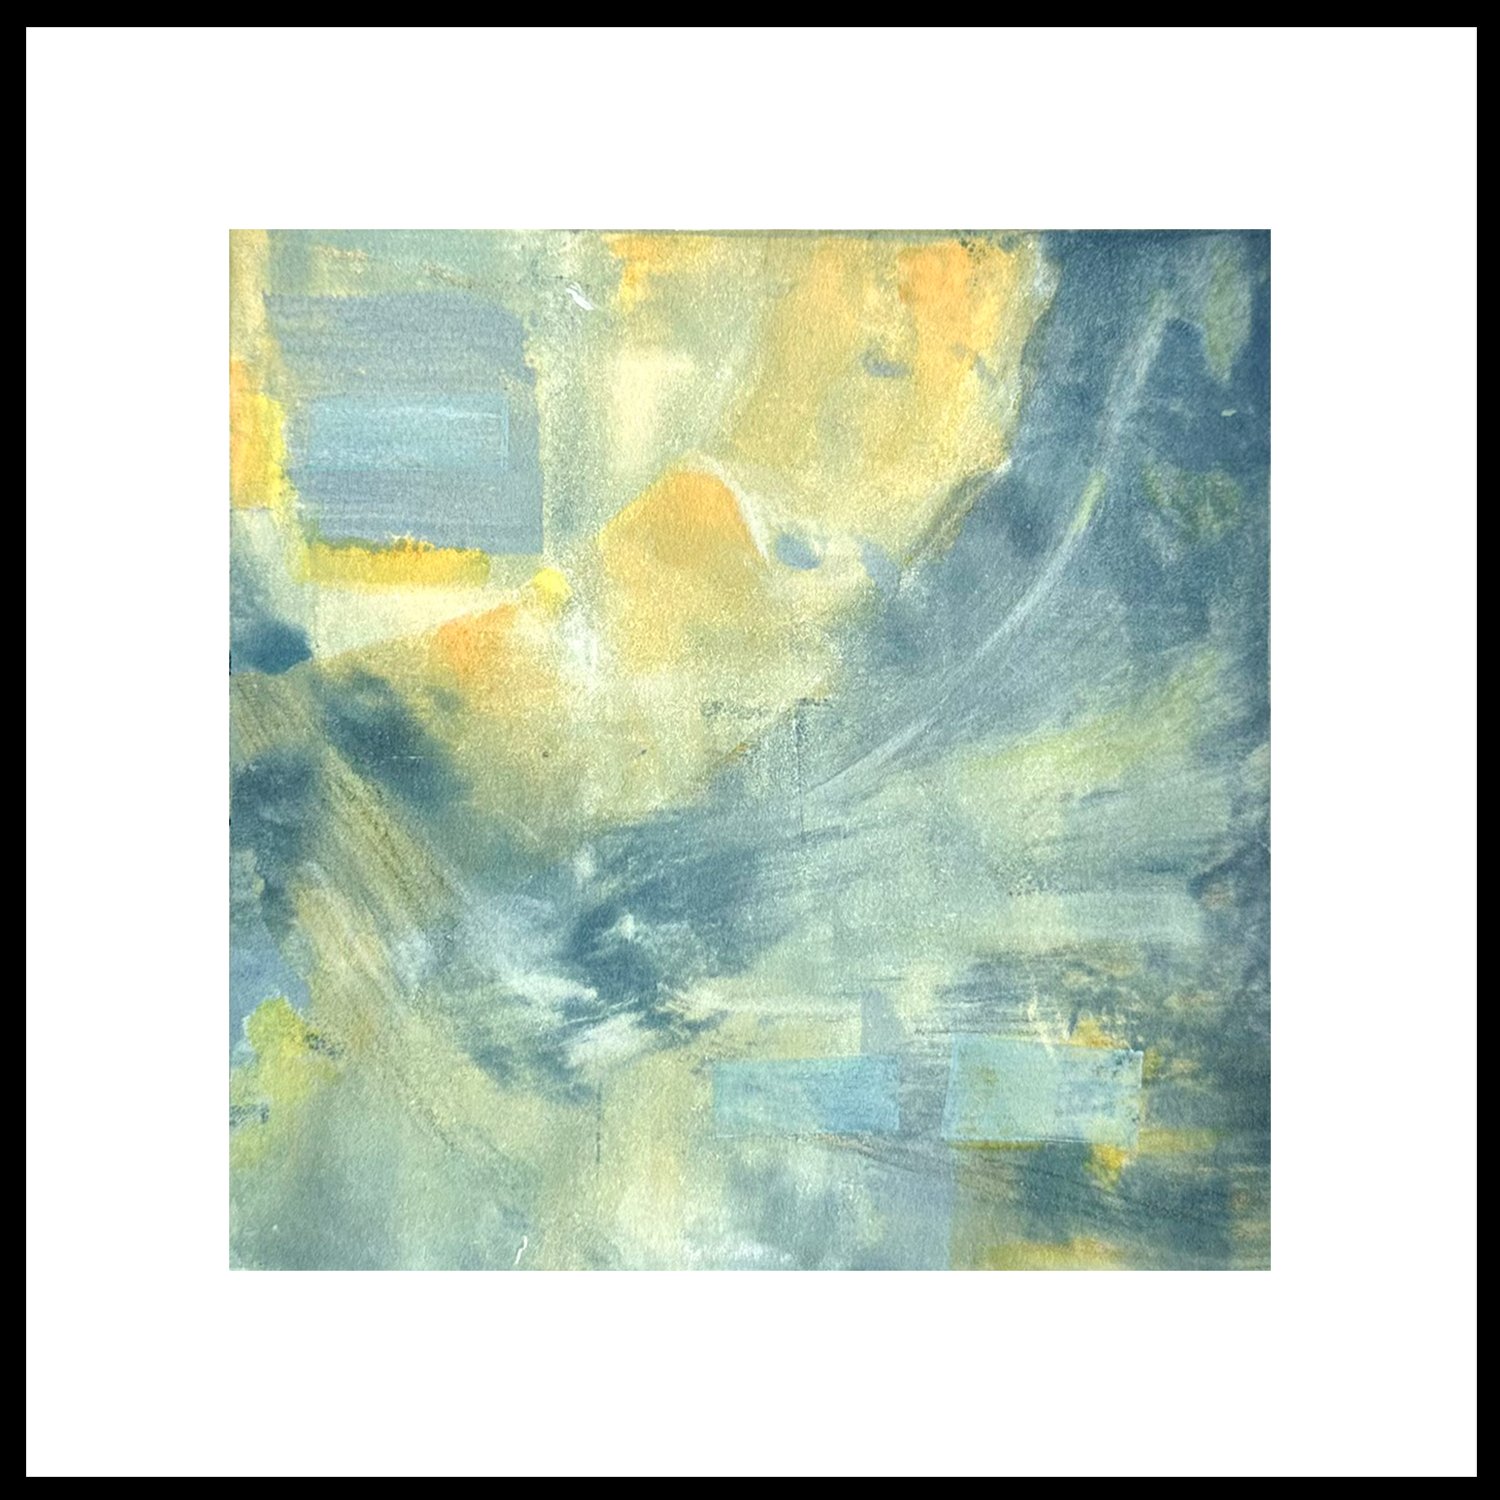    "Dreams Take Flight"    Open your imagination to new possibilities.  Monotype, 1/1, plate size 6 x 6”, matted, presented in a 12 x 12 black metal frame   $250   Shipping and handling are not included in the cost of the artwork.    Please link here